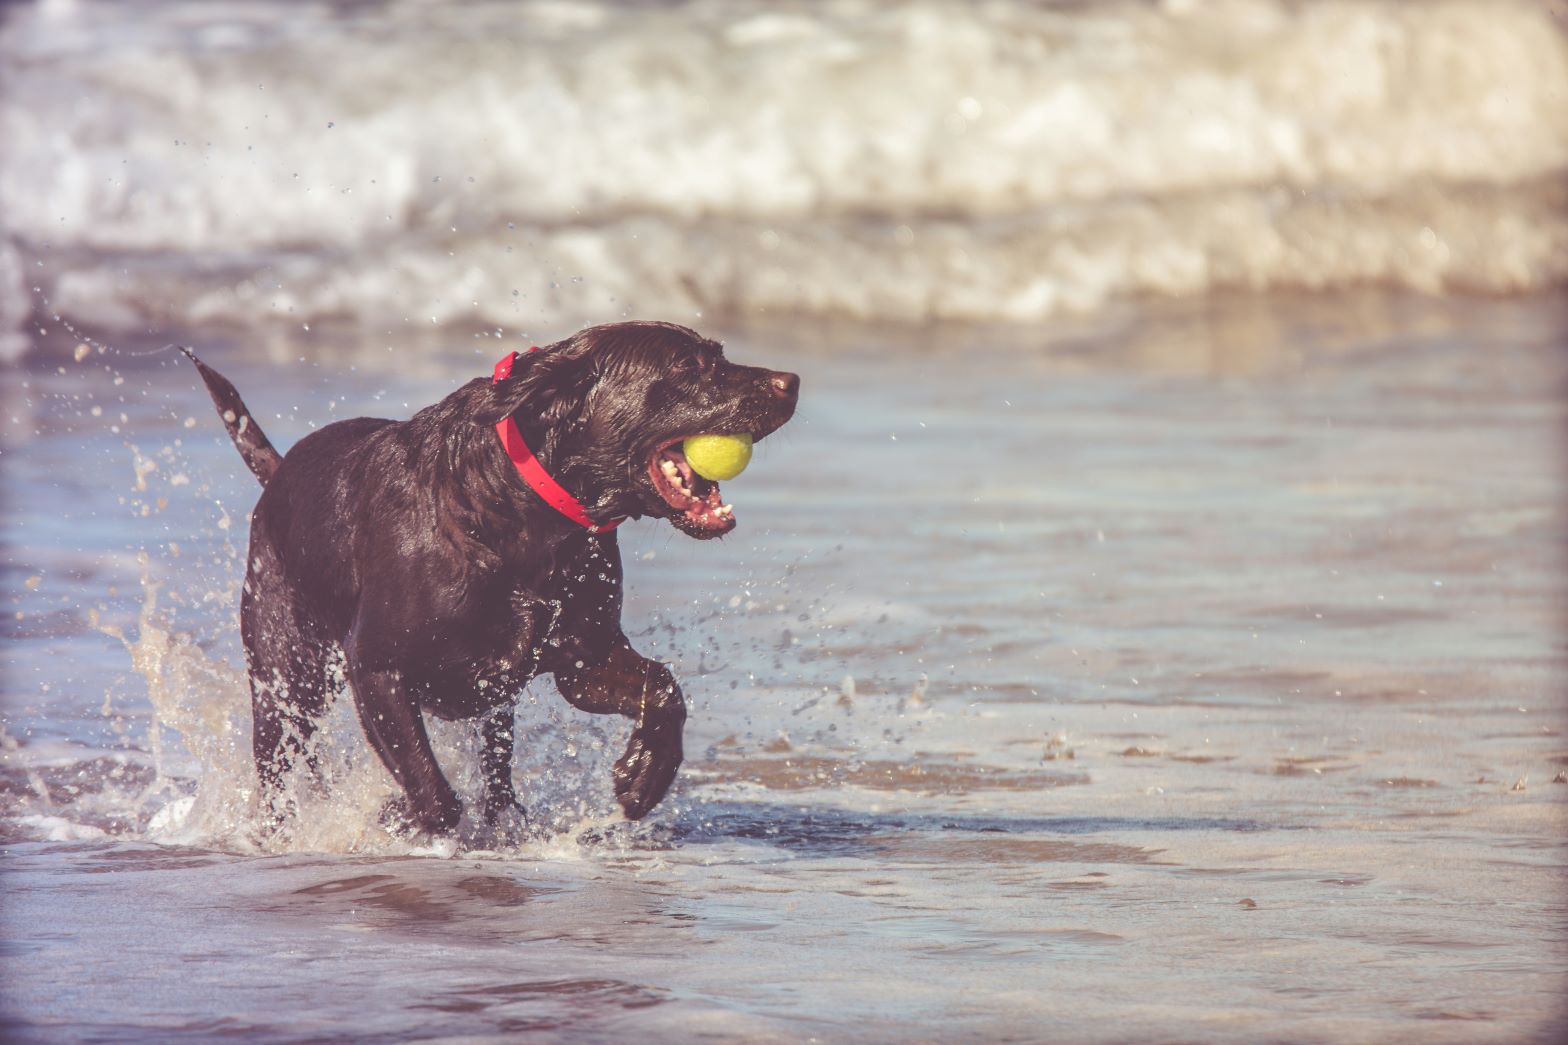 Guide to Dog-Friendly Beaches